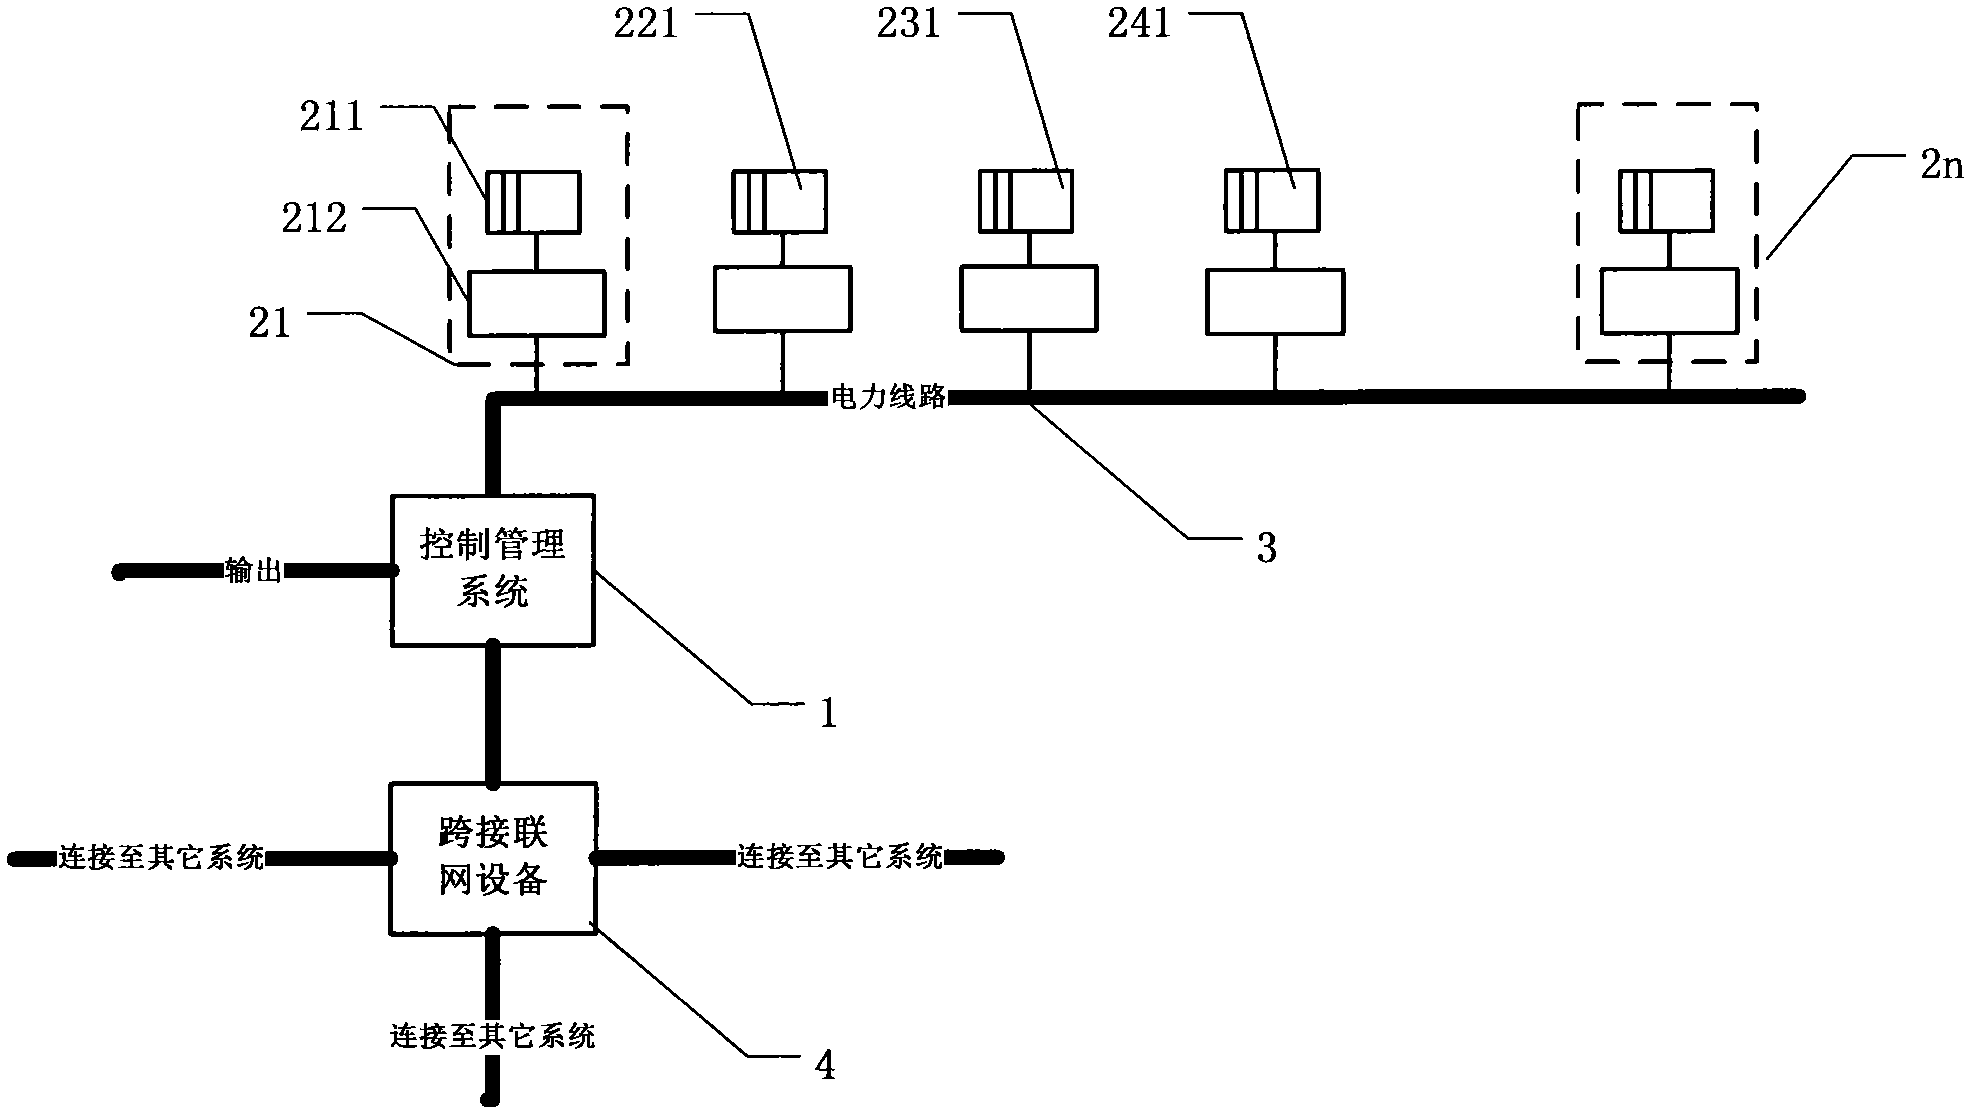 Distributed power station system